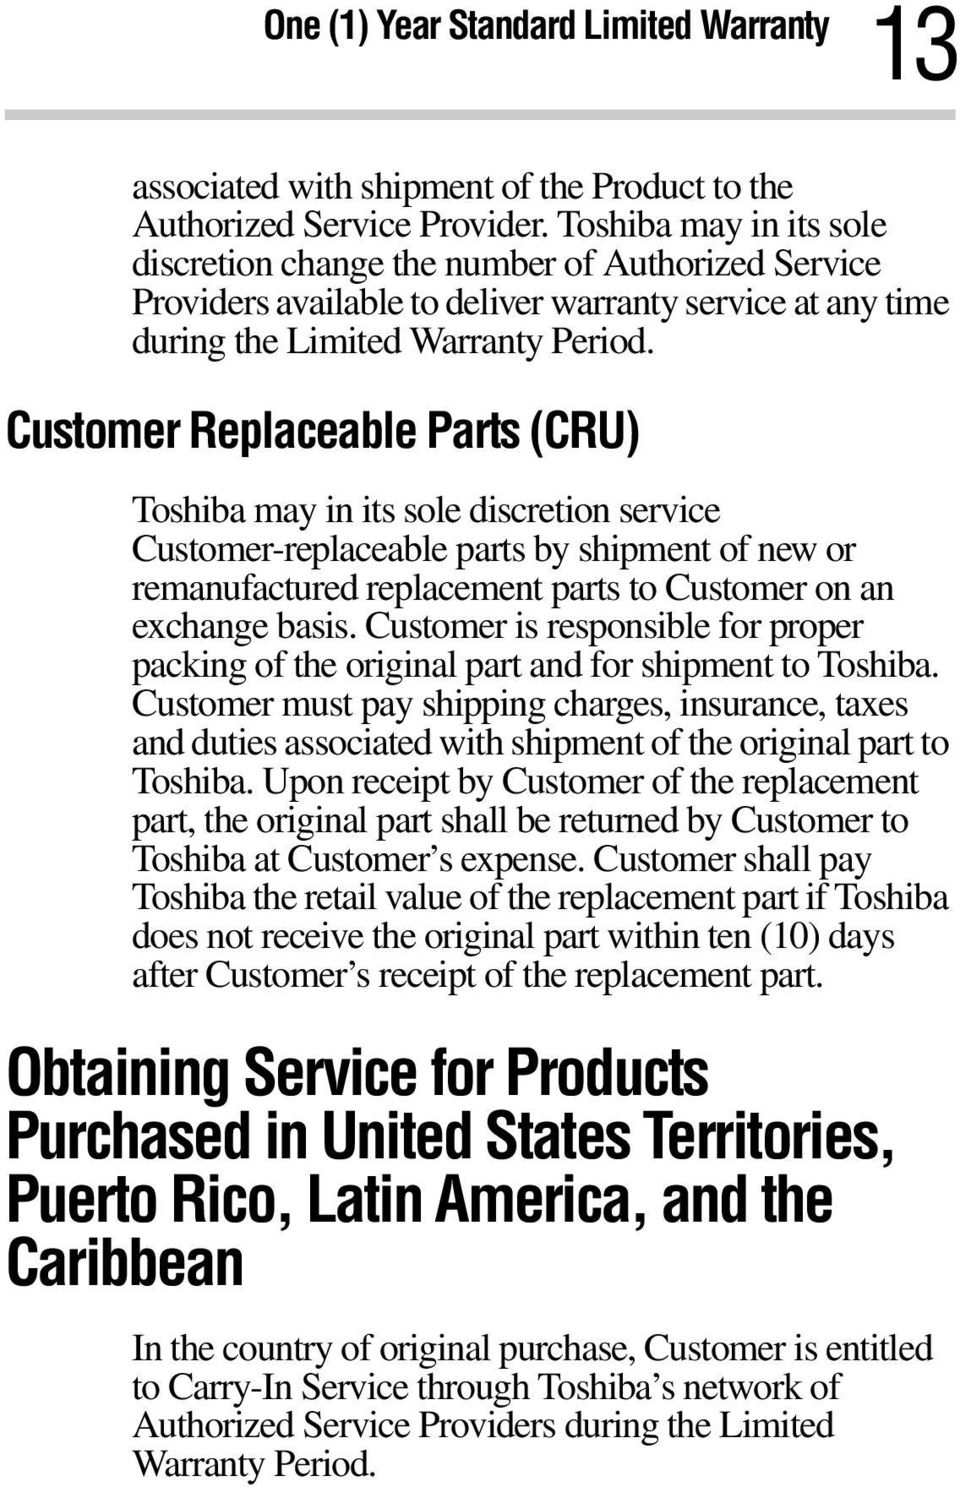 Customer Replaceable Parts (CRU) Toshiba may in its sole discretion service Customer-replaceable parts by shipment of new or remanufactured replacement parts to Customer on an exchange basis.